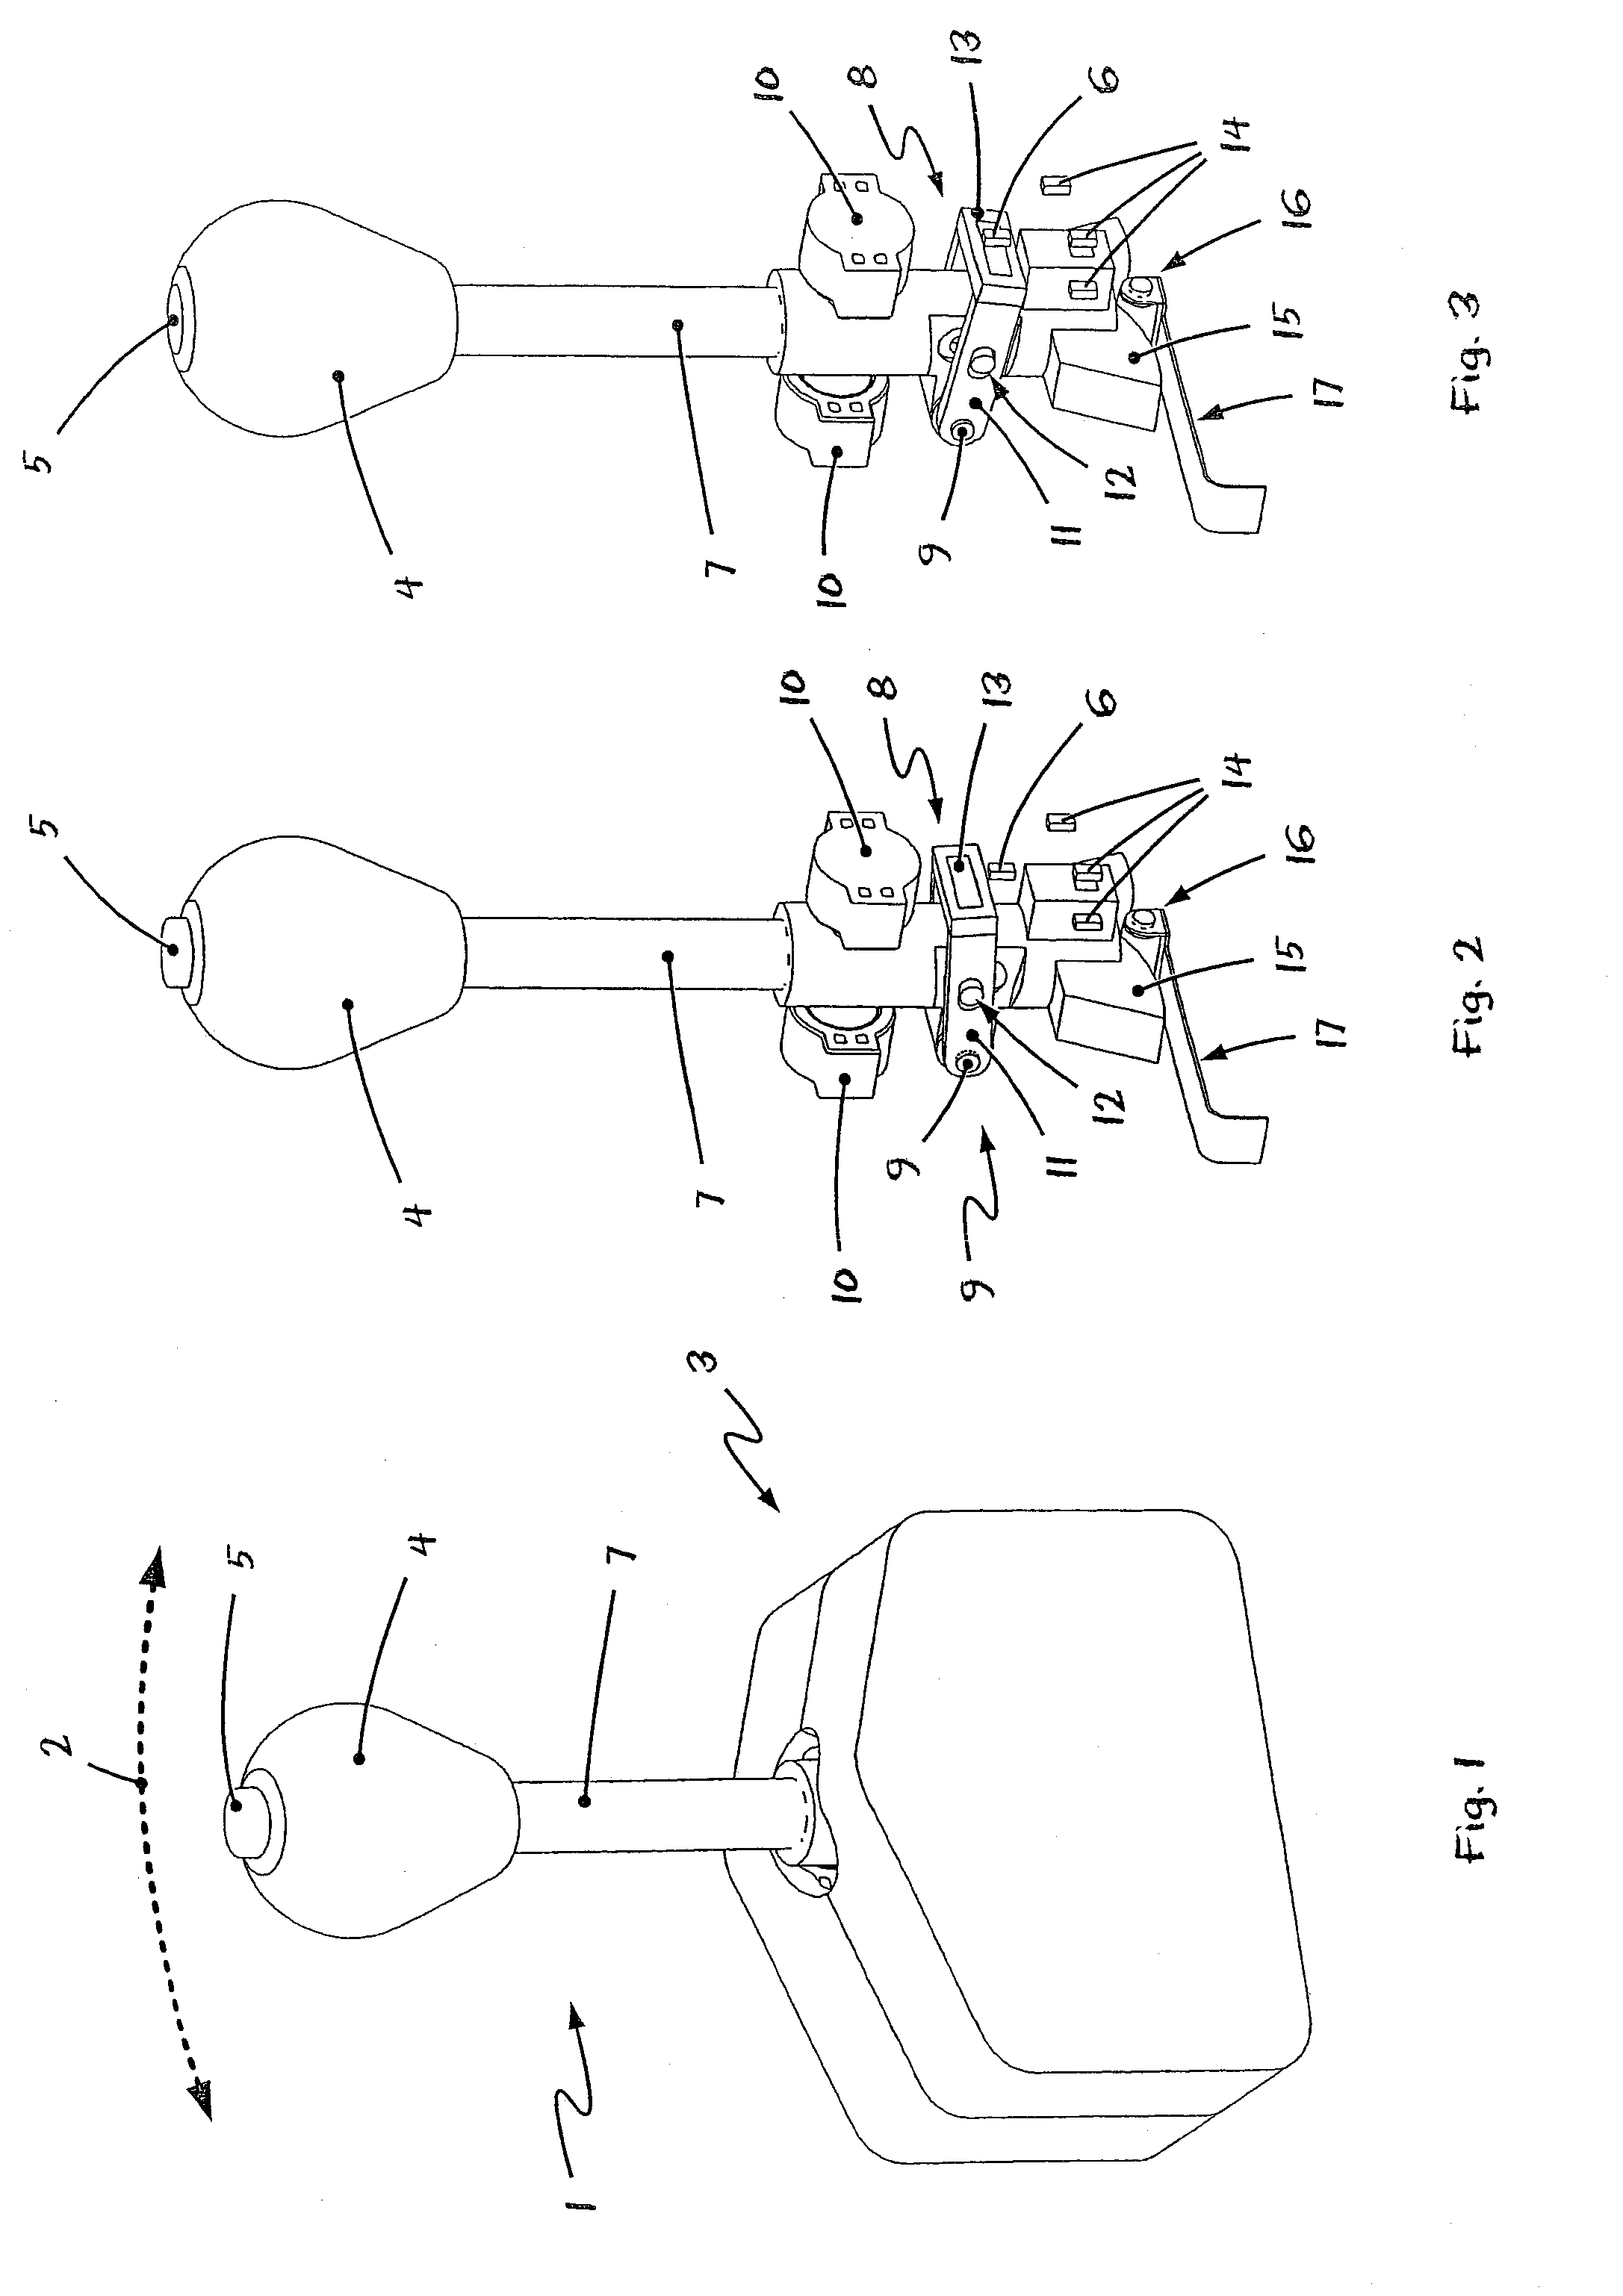 Actuating device with an additional switching element